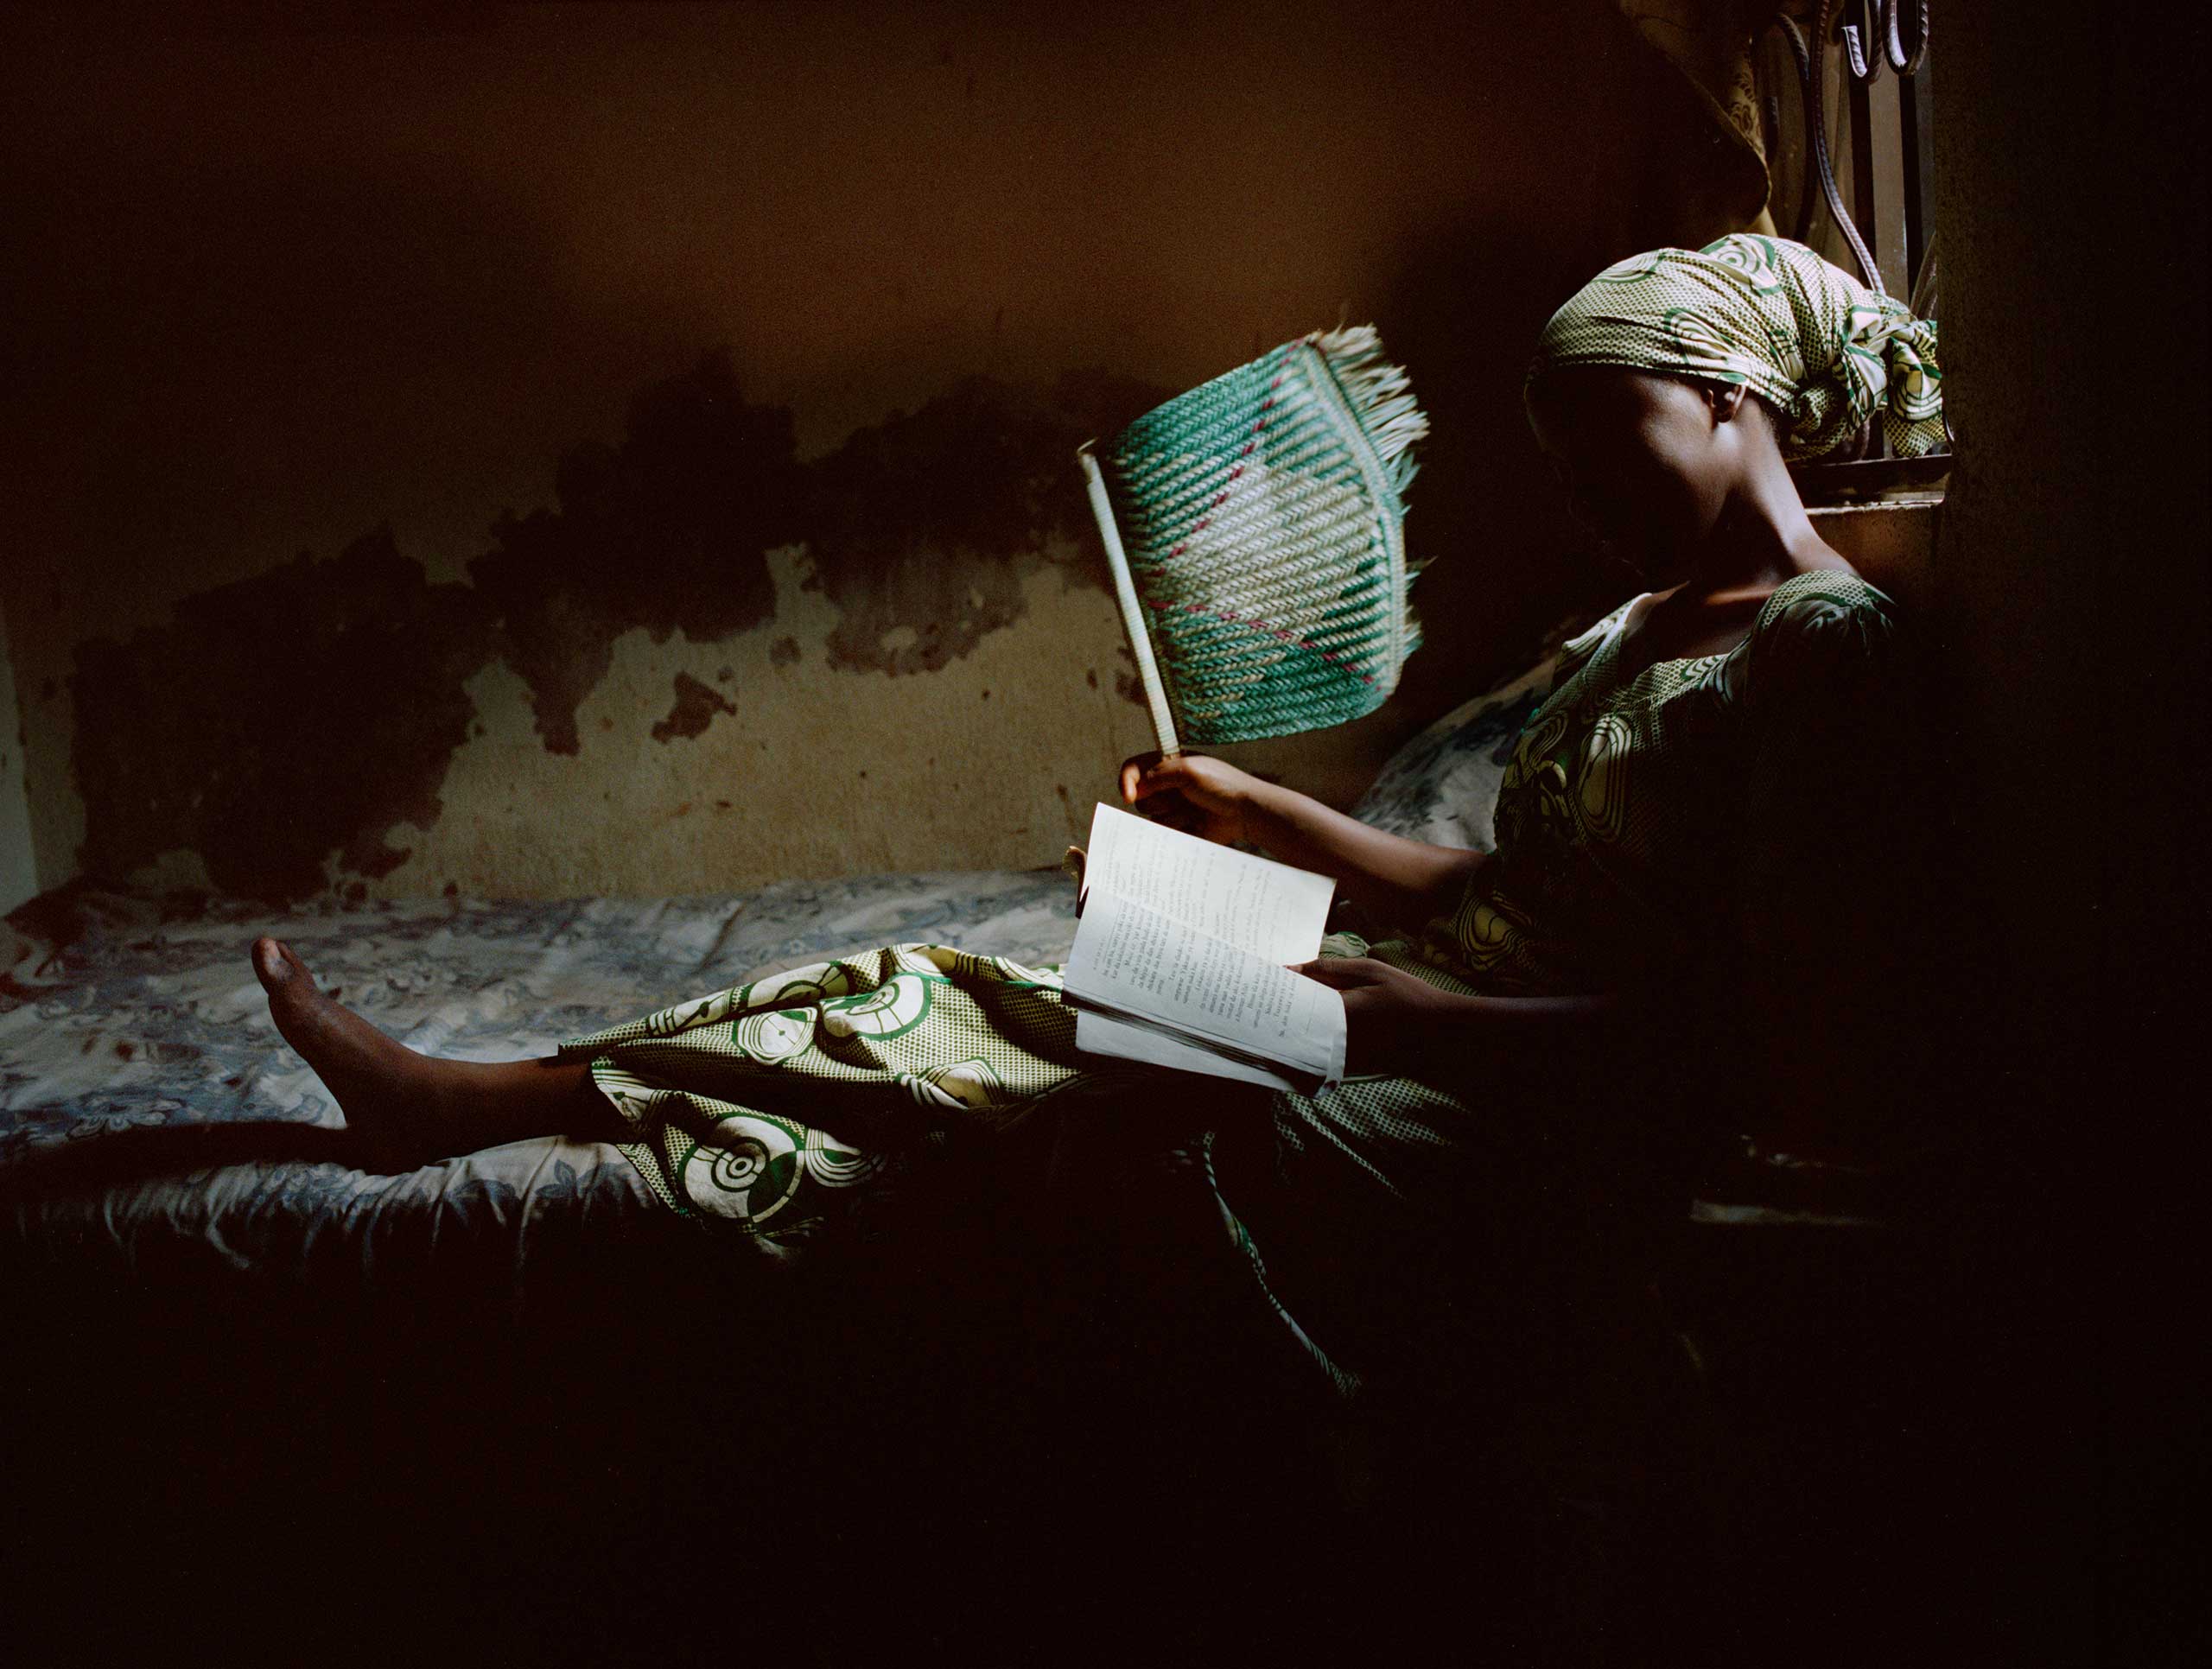 Firdausy El-yakub reads a romance novel in her bedroom in Kano, Northern Nigeria, March 21, 2013.